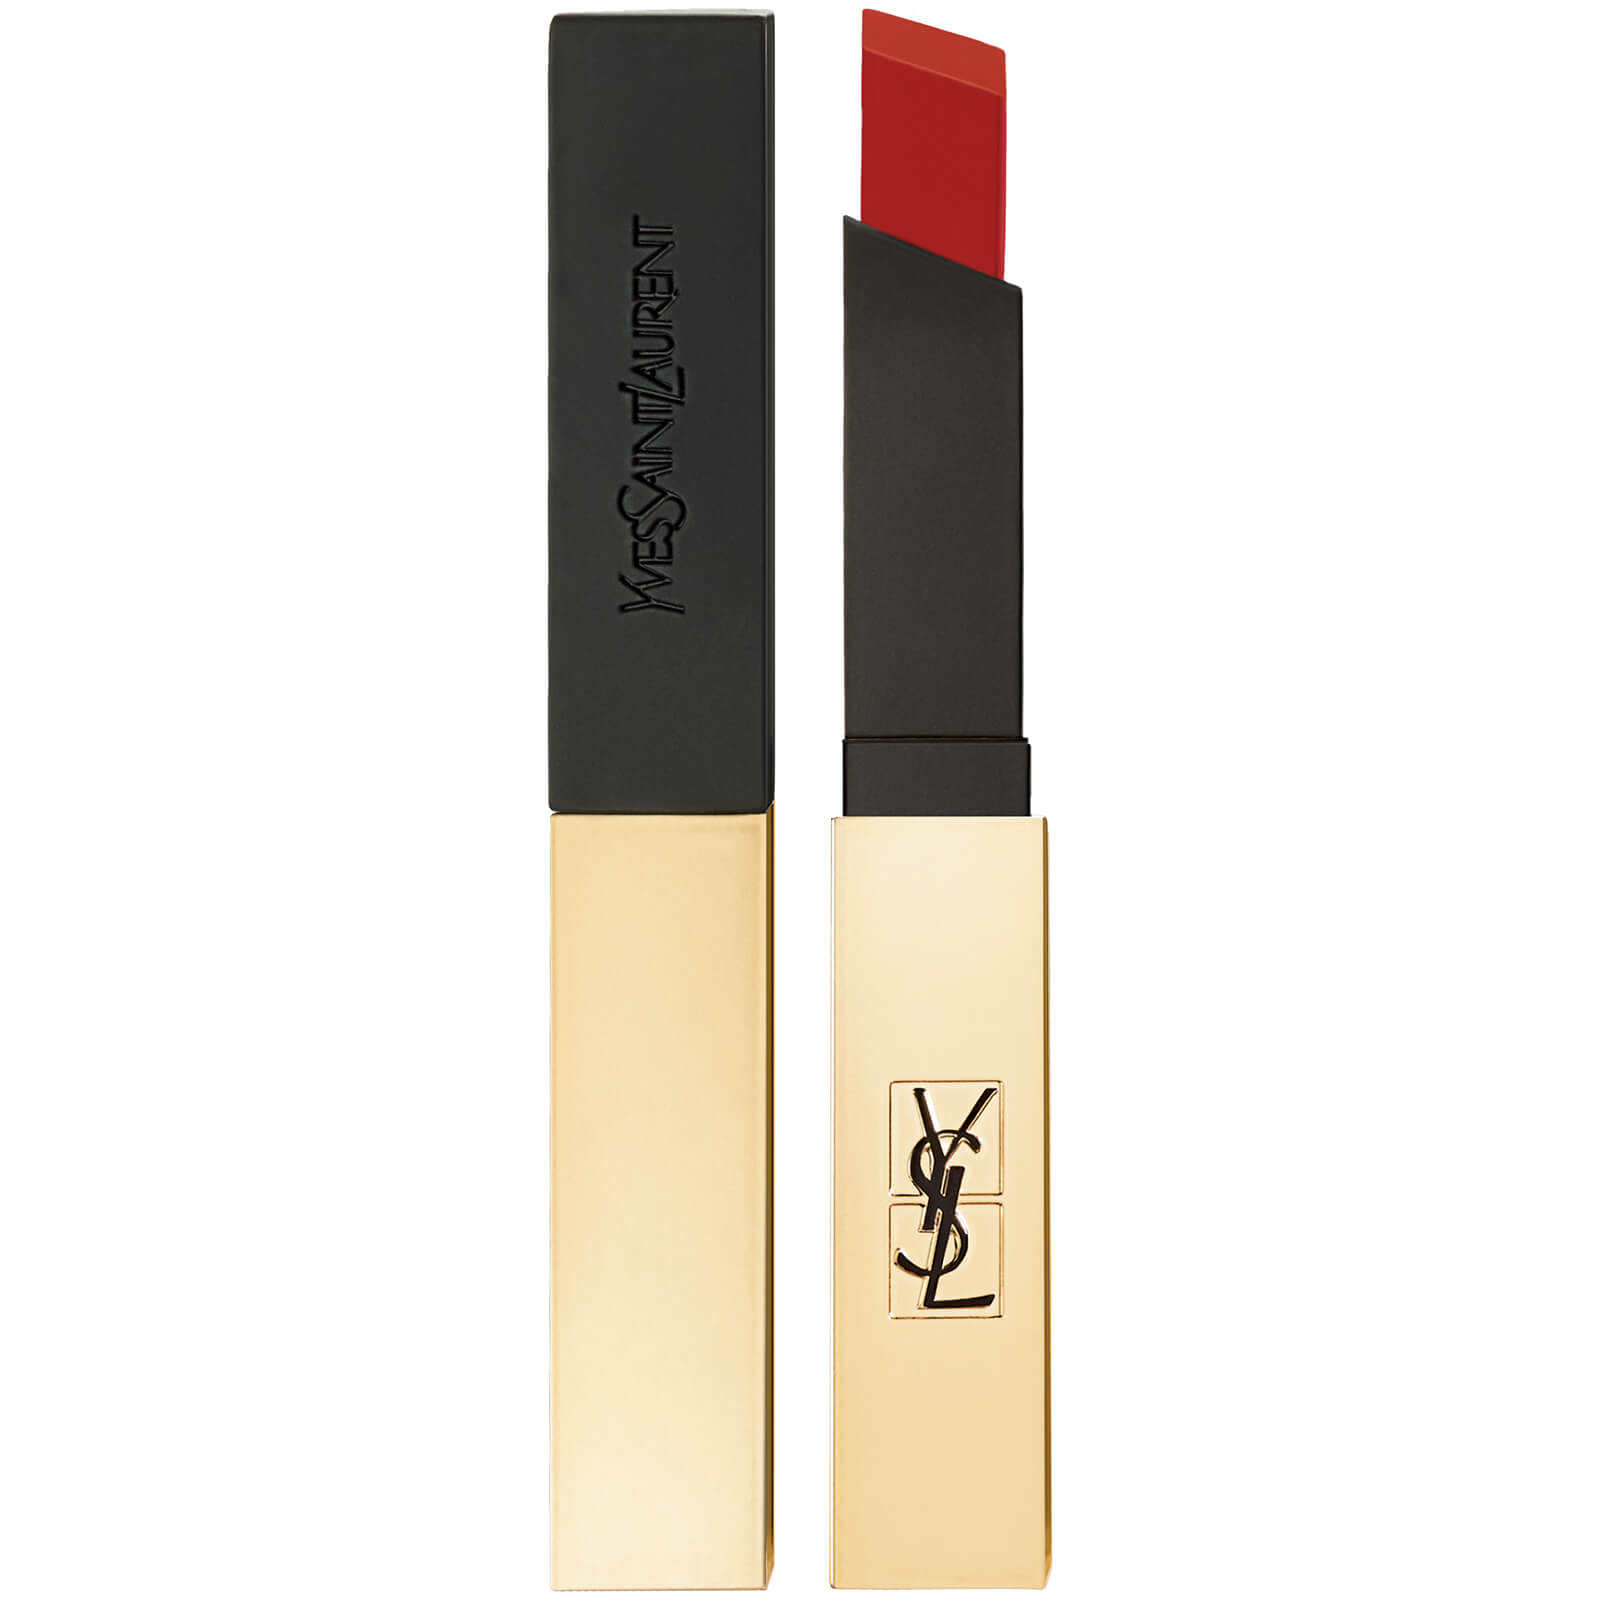 Ysl Yves Saint Laurent Rouge Pur Couture The Slim Lipstick 3.8ml (Various Shades) - 28 True Chili